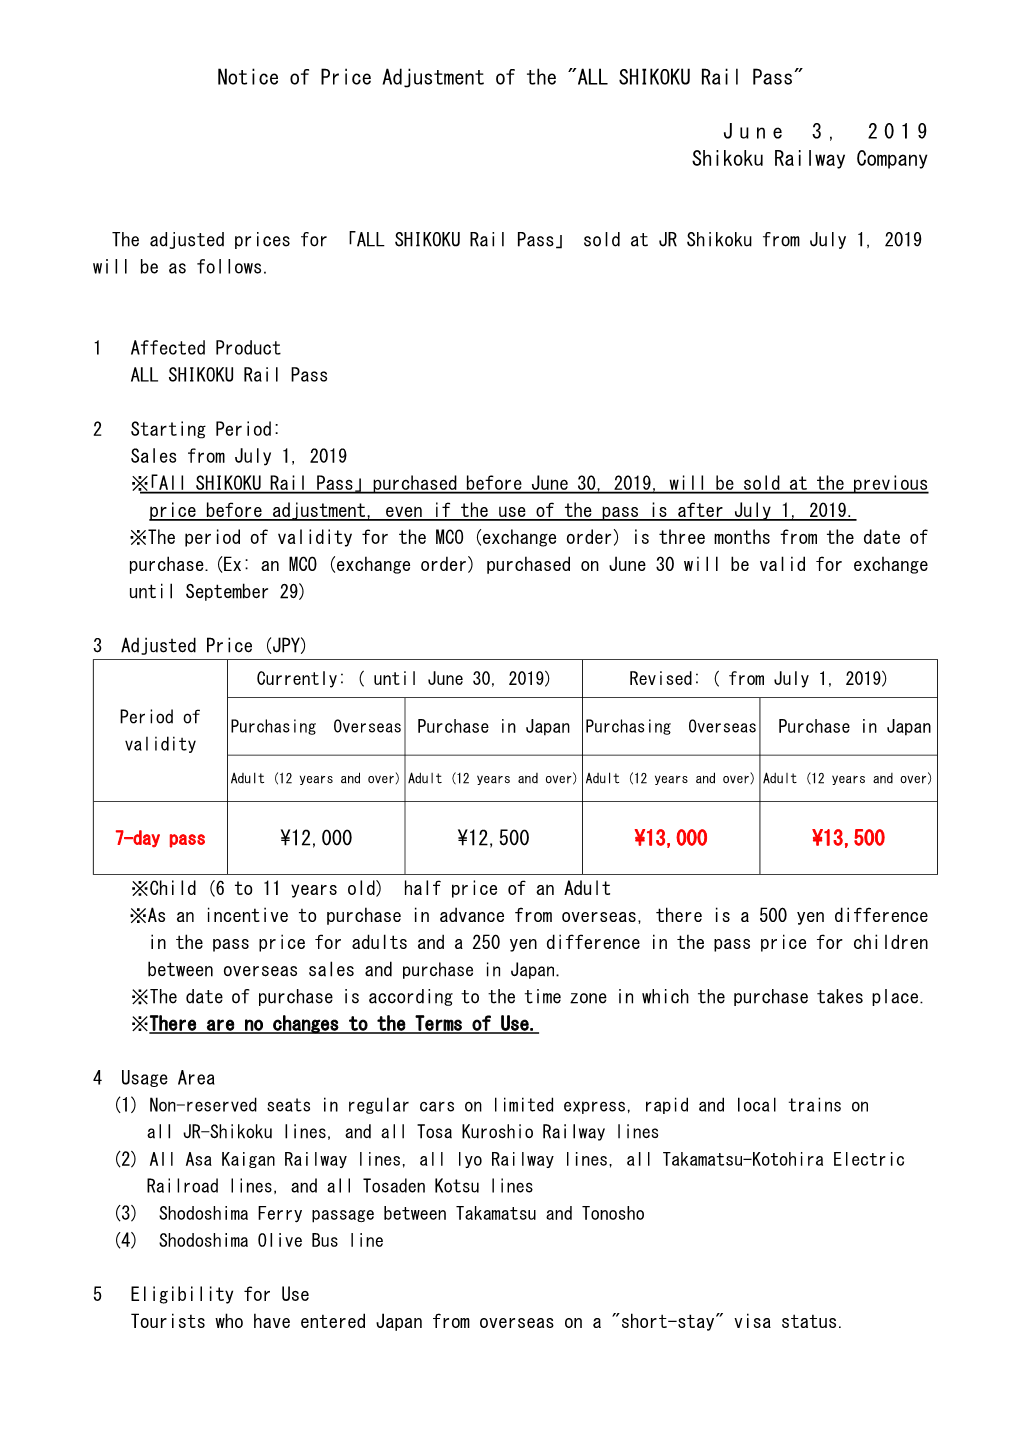 Notice of Price Adjustment of the "ALL SHIKOKU Rail Pass"